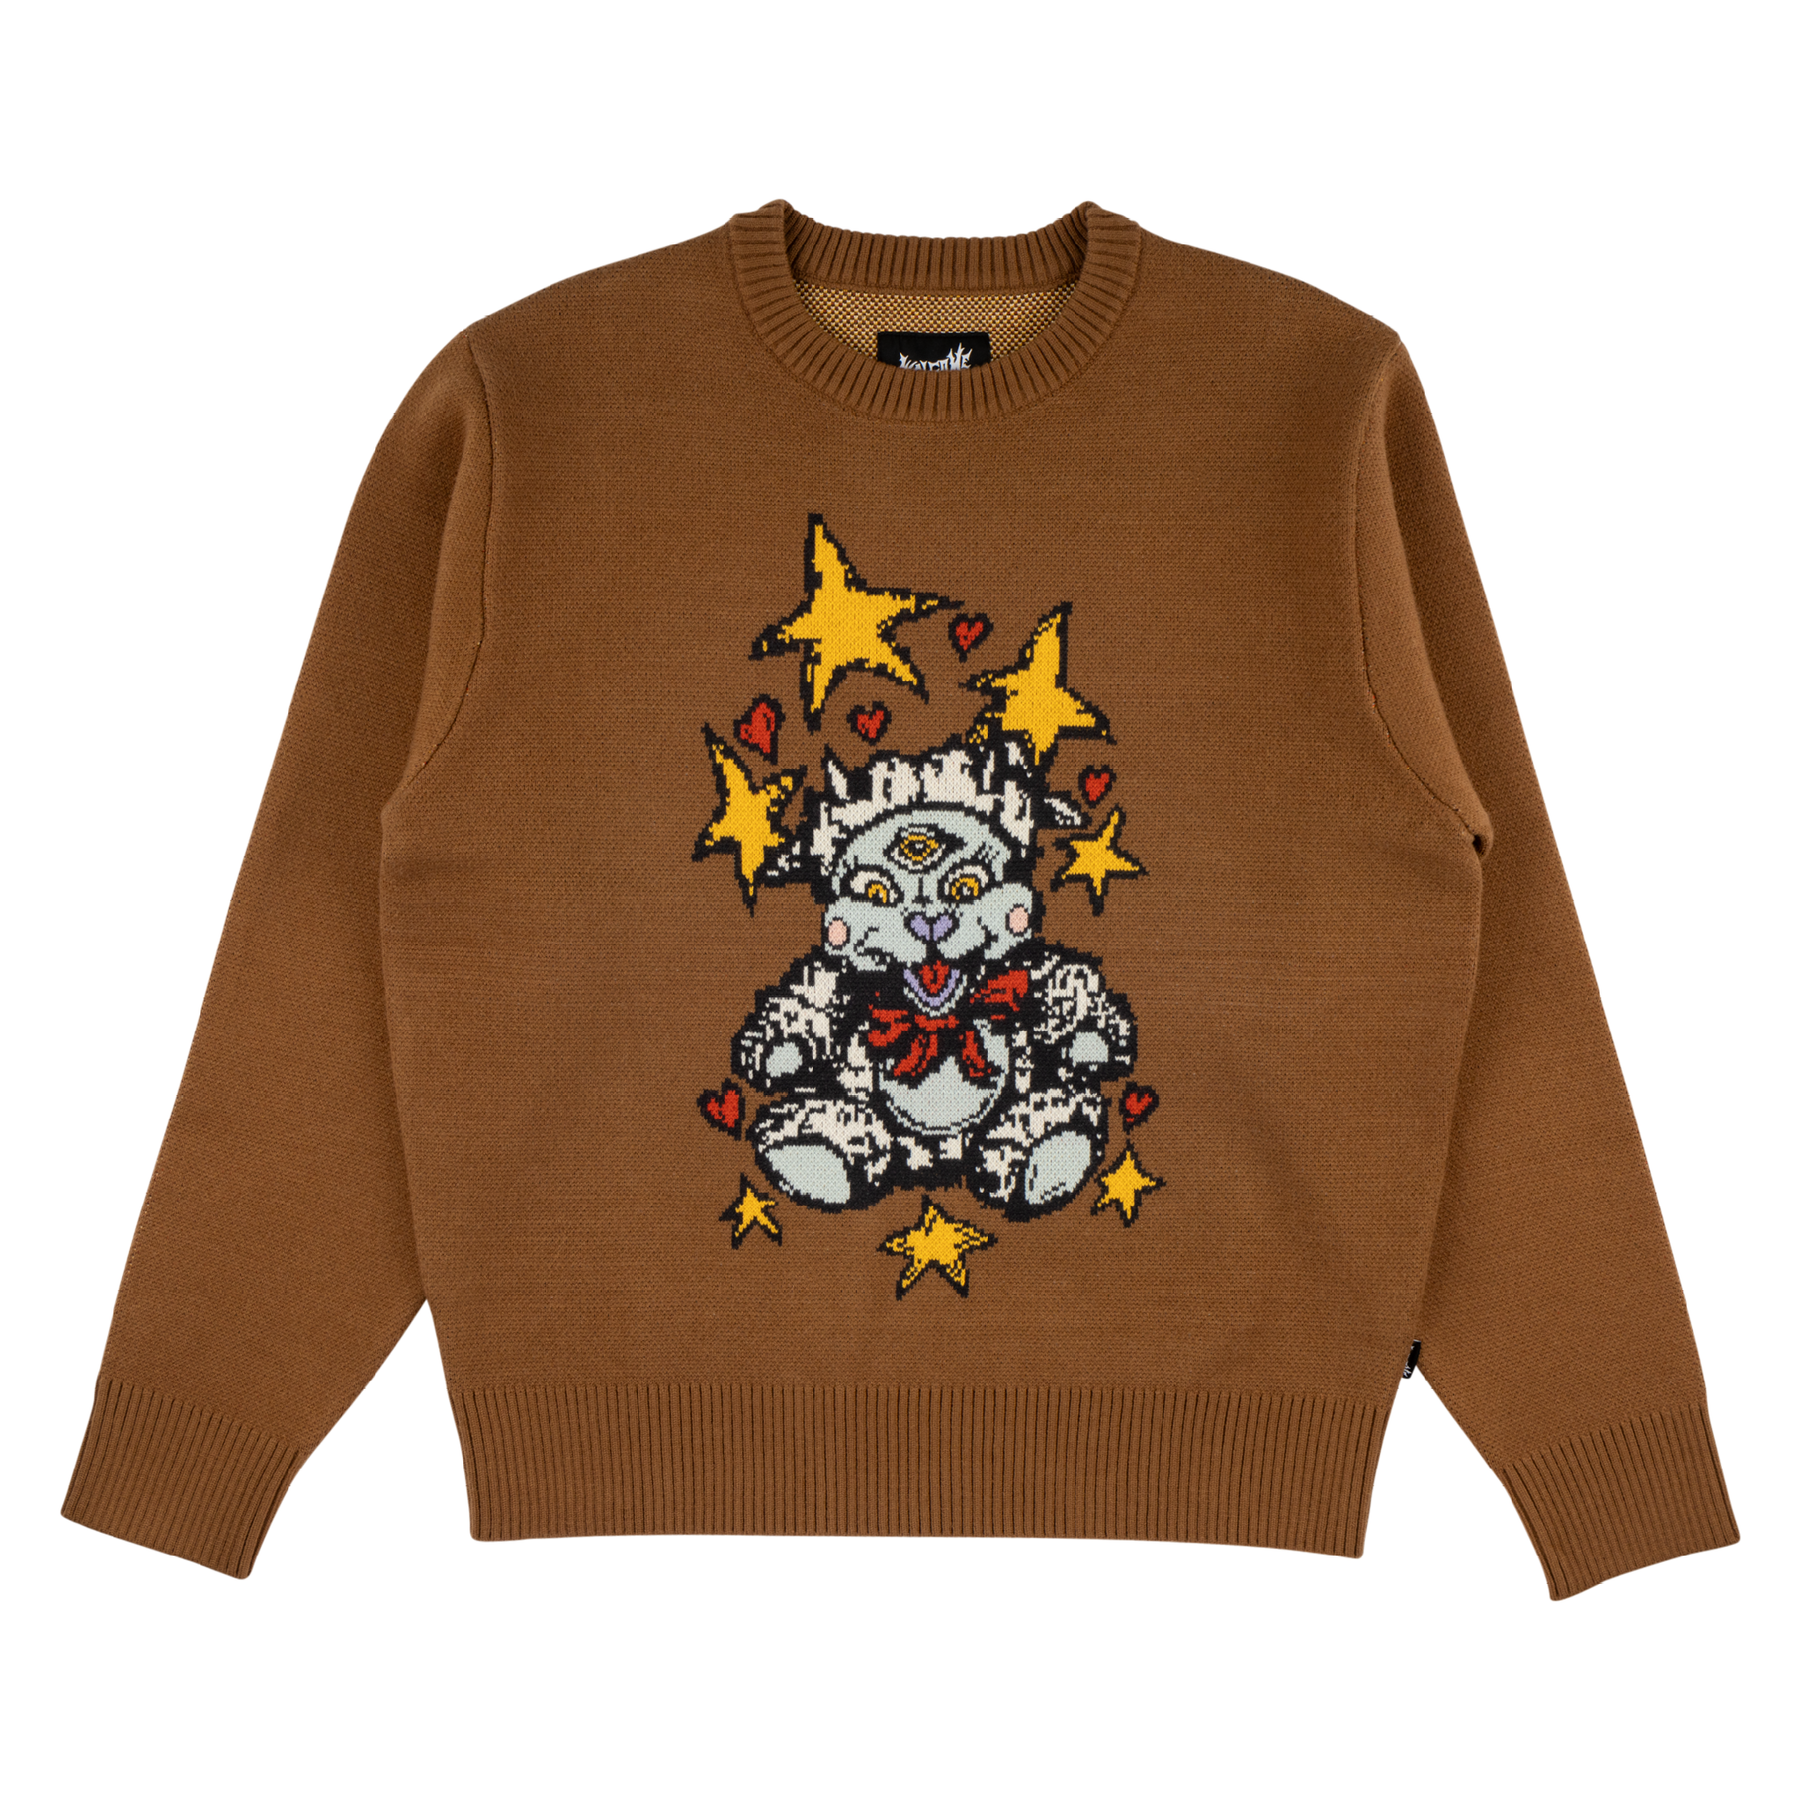 Brown Lamby Knit Welcome Skateboards Sweater